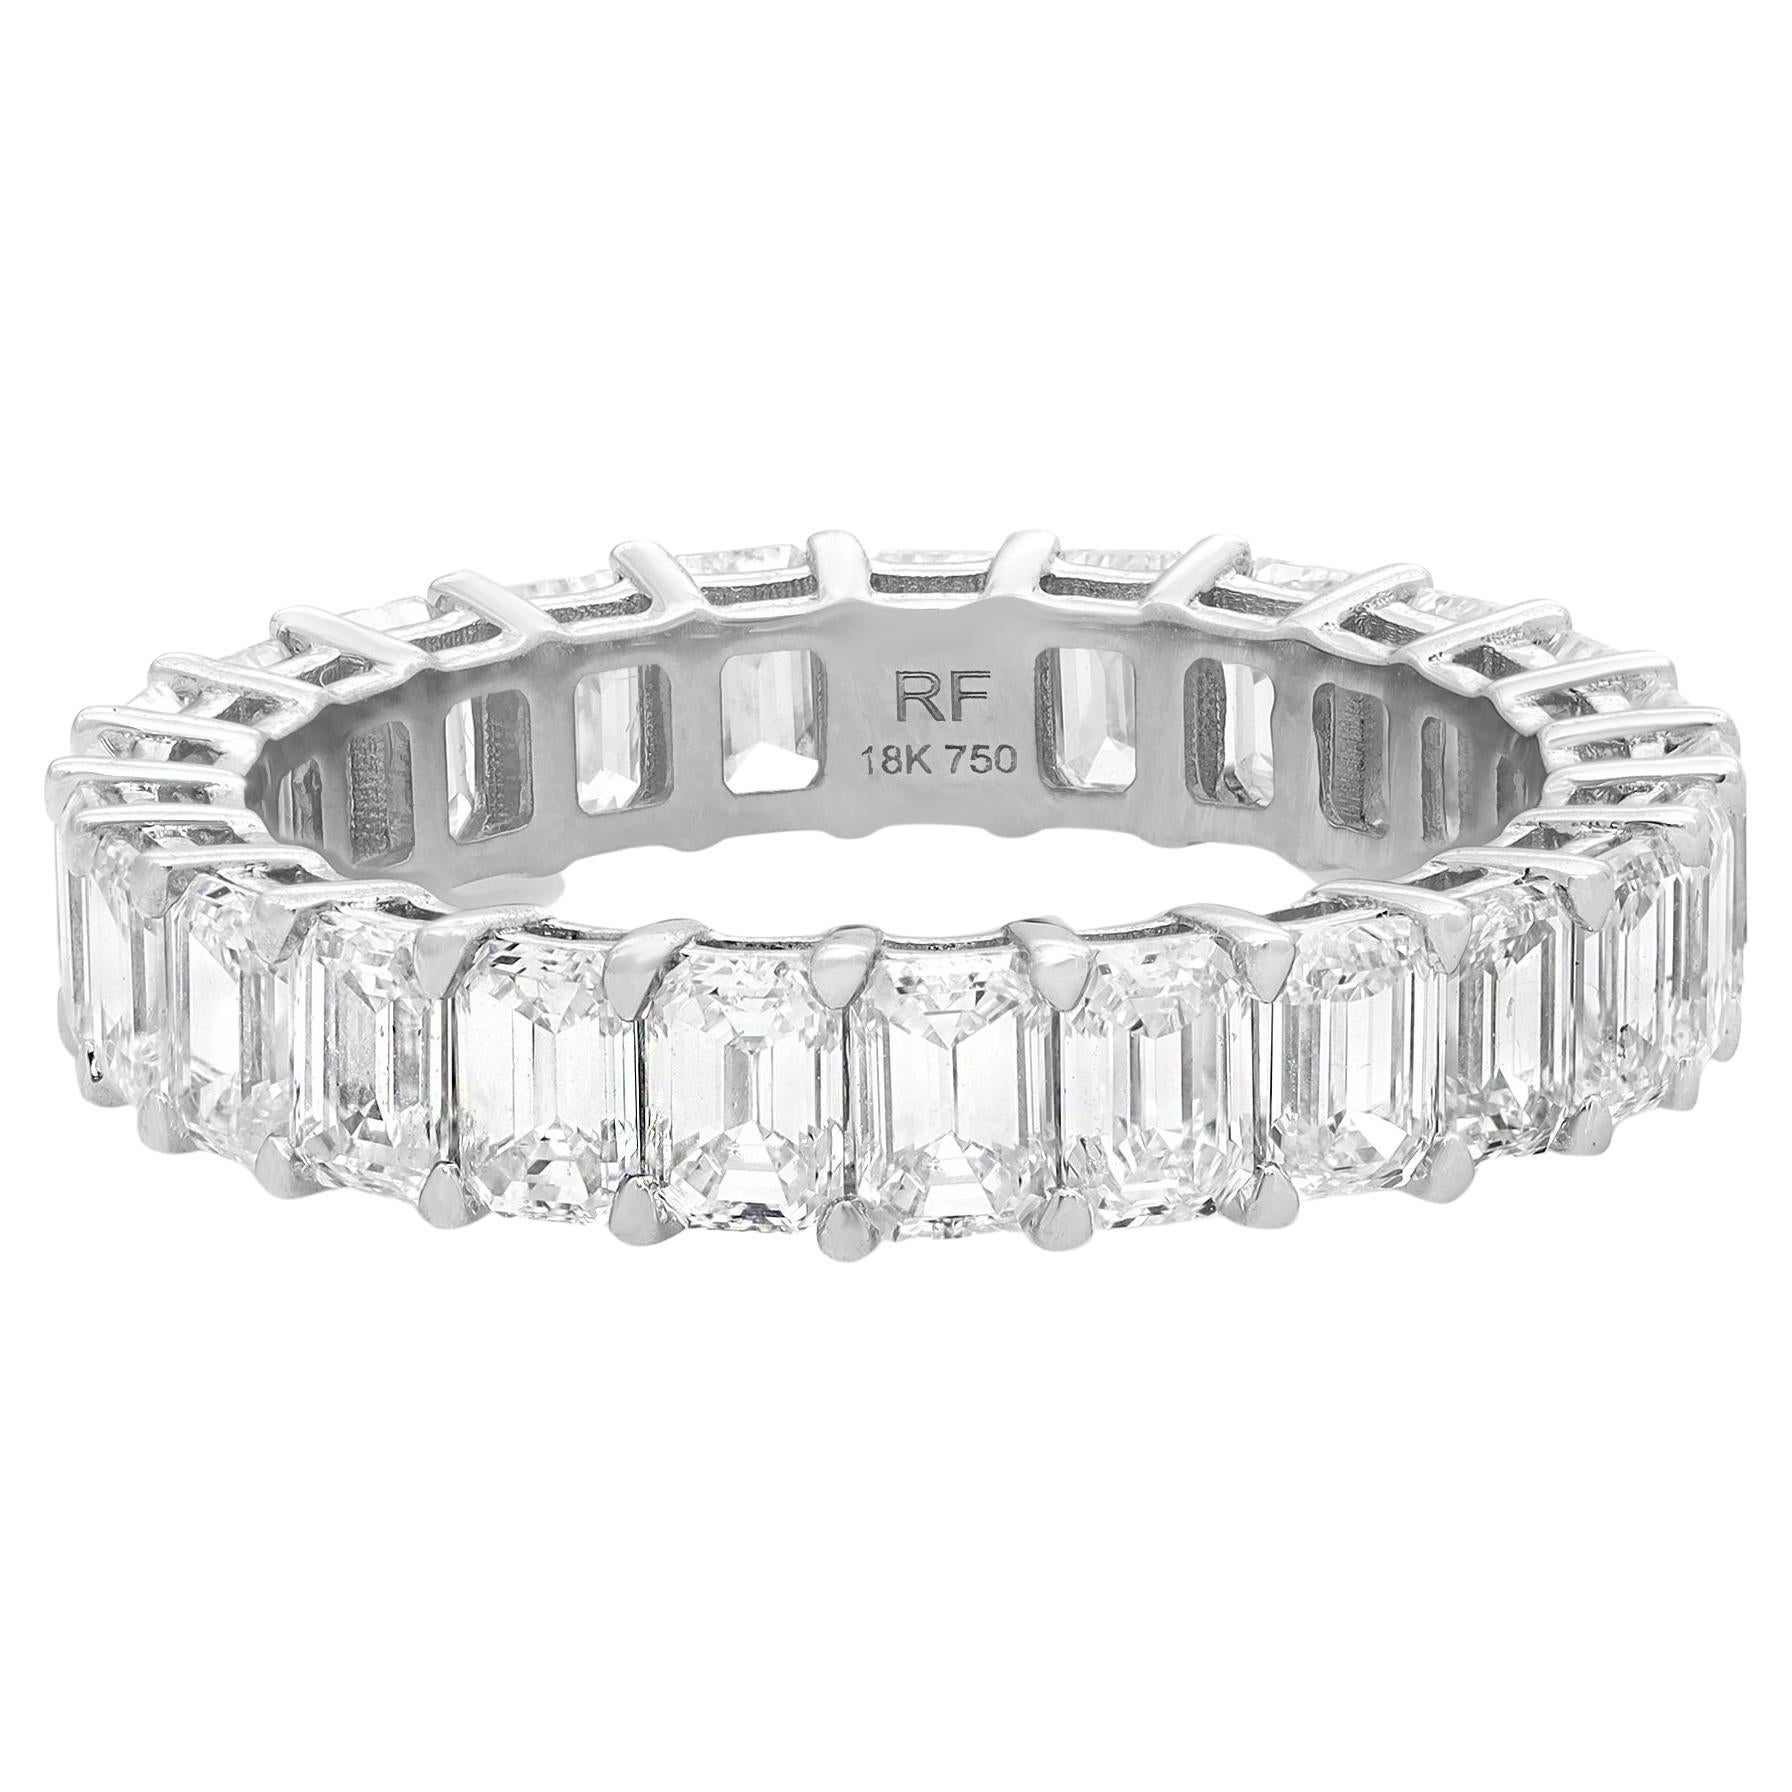 3.71cttw Emerald Cut Diamond Eternity Band Ring 18K White Gold For Sale